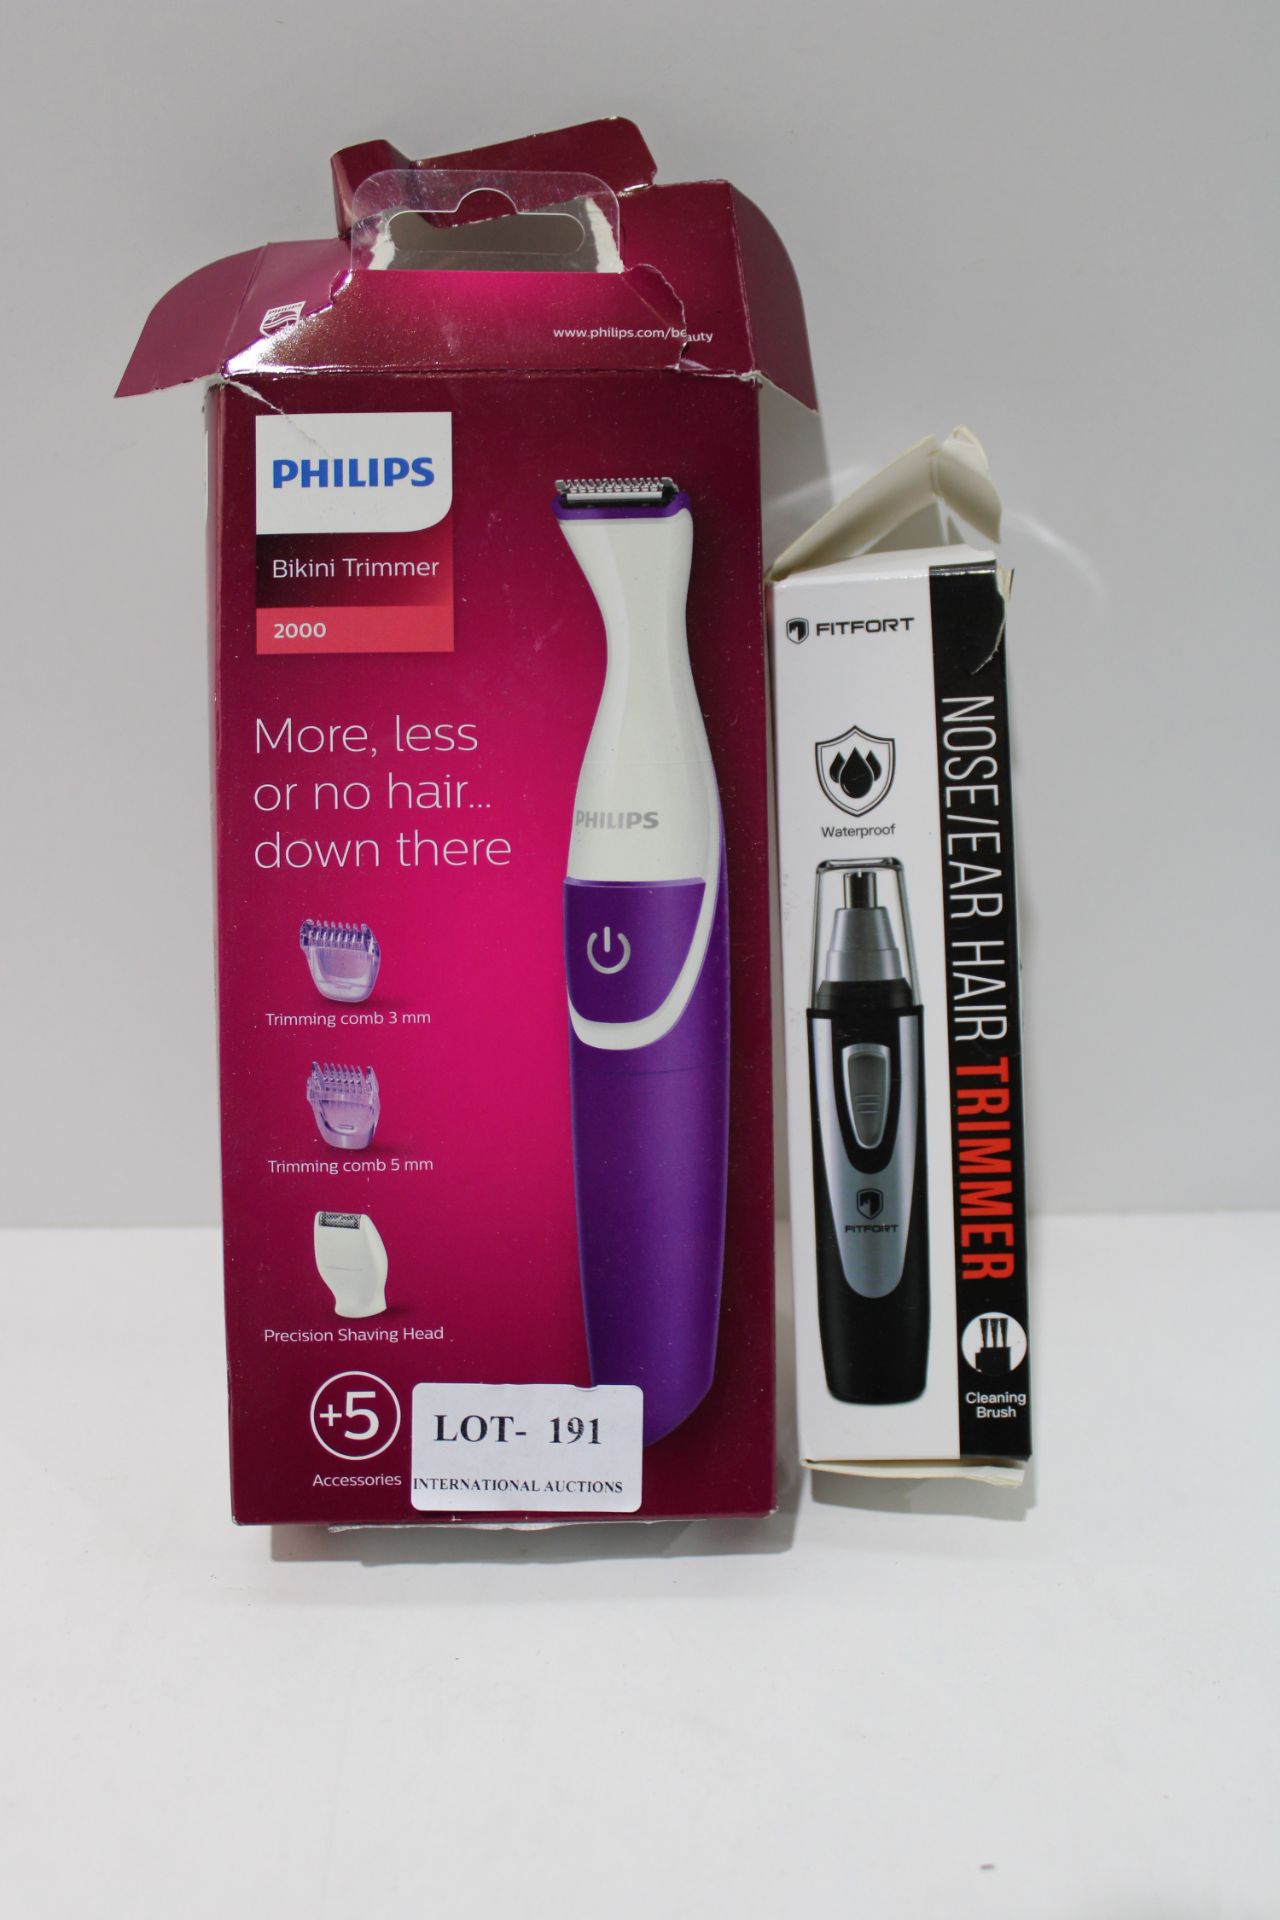 X 2 ITEMS TO INCLUDE PHILIPS BIKINI TRIMMER & FITFORT NOSE/EAR HAIR TRIMMERCondition ReportAppraisal